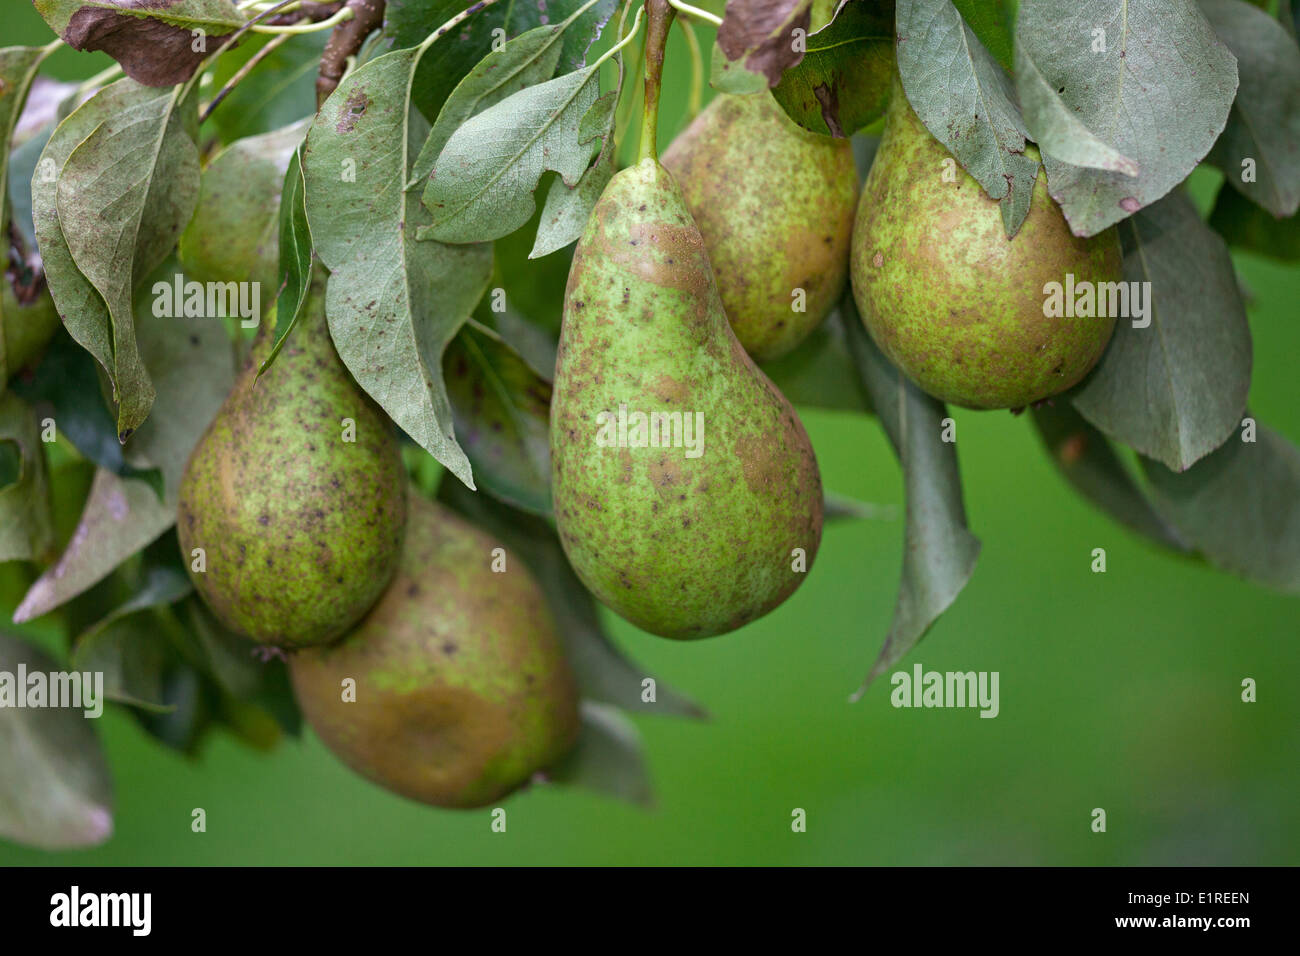 Close-up of Conference pears in an orchard Stock Photo